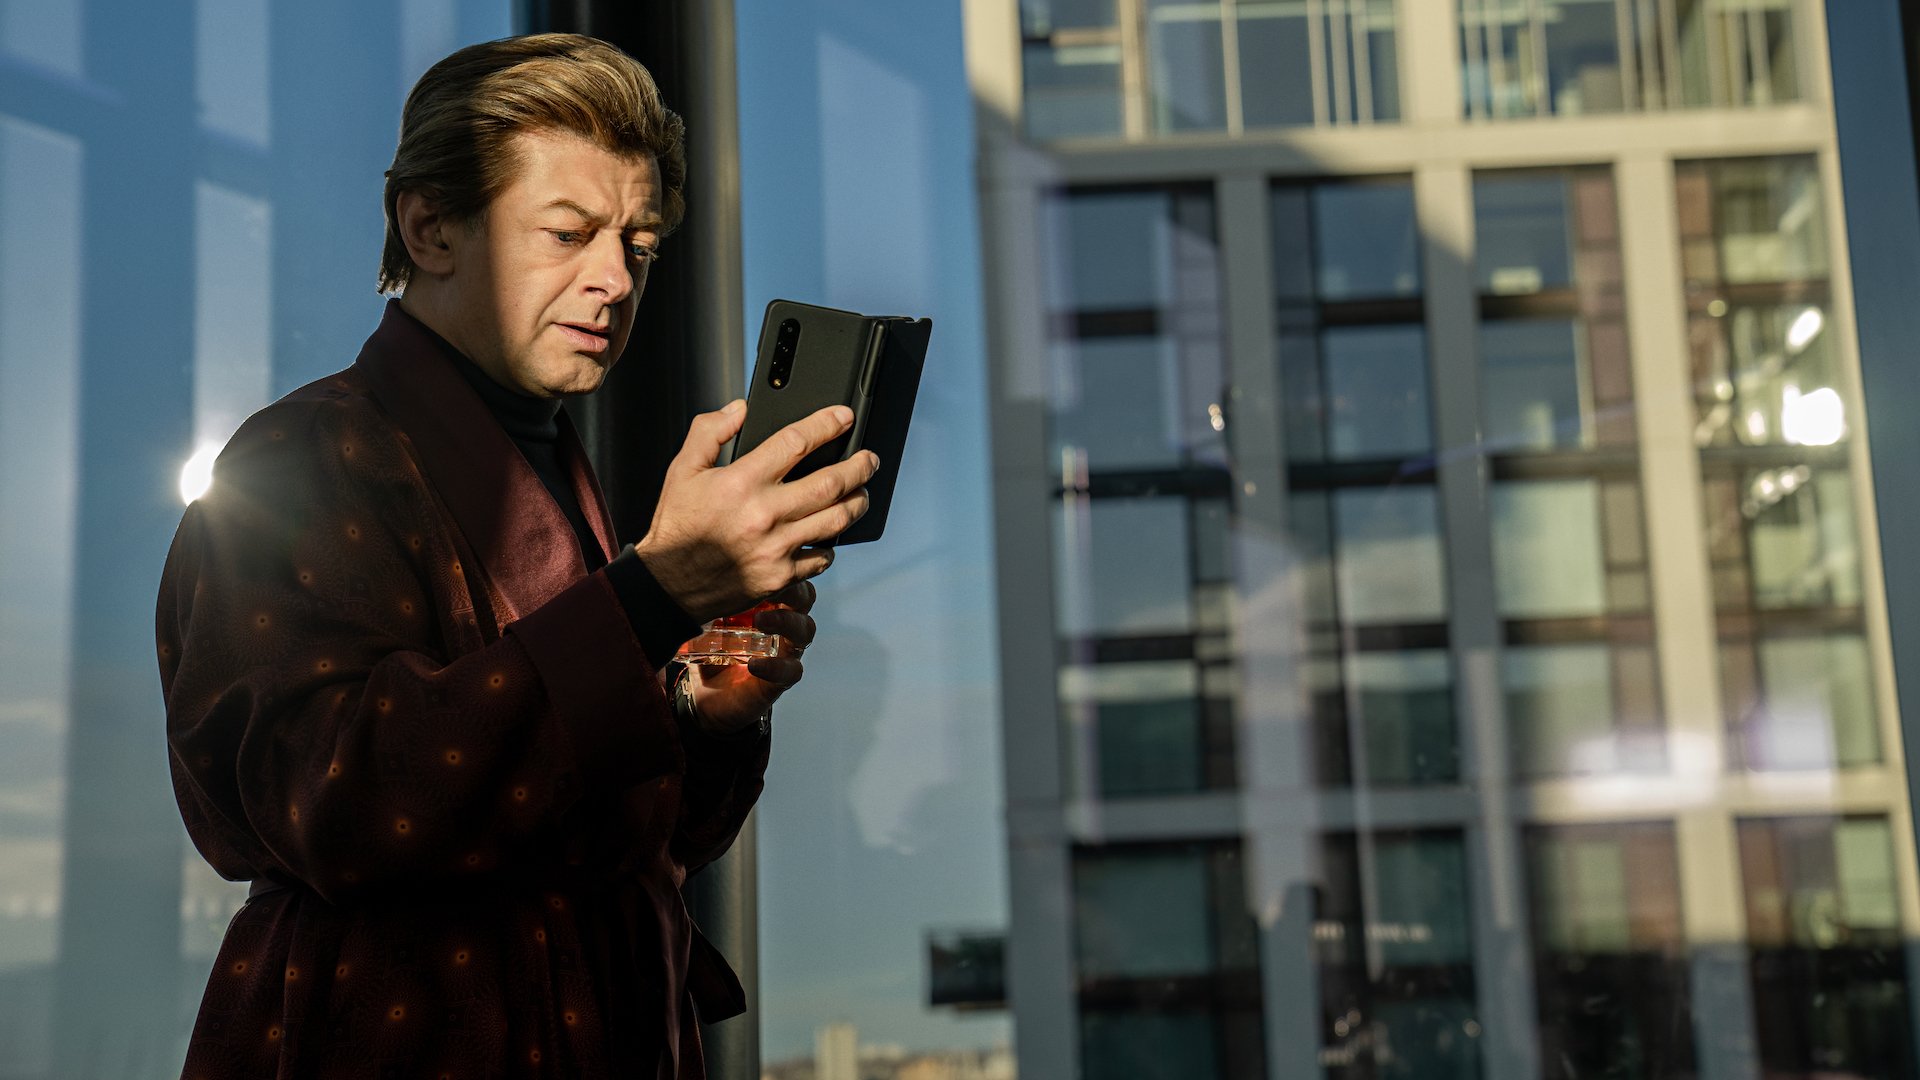 A wealthy man in a robe uses a foldable phone in an all glass apartment.